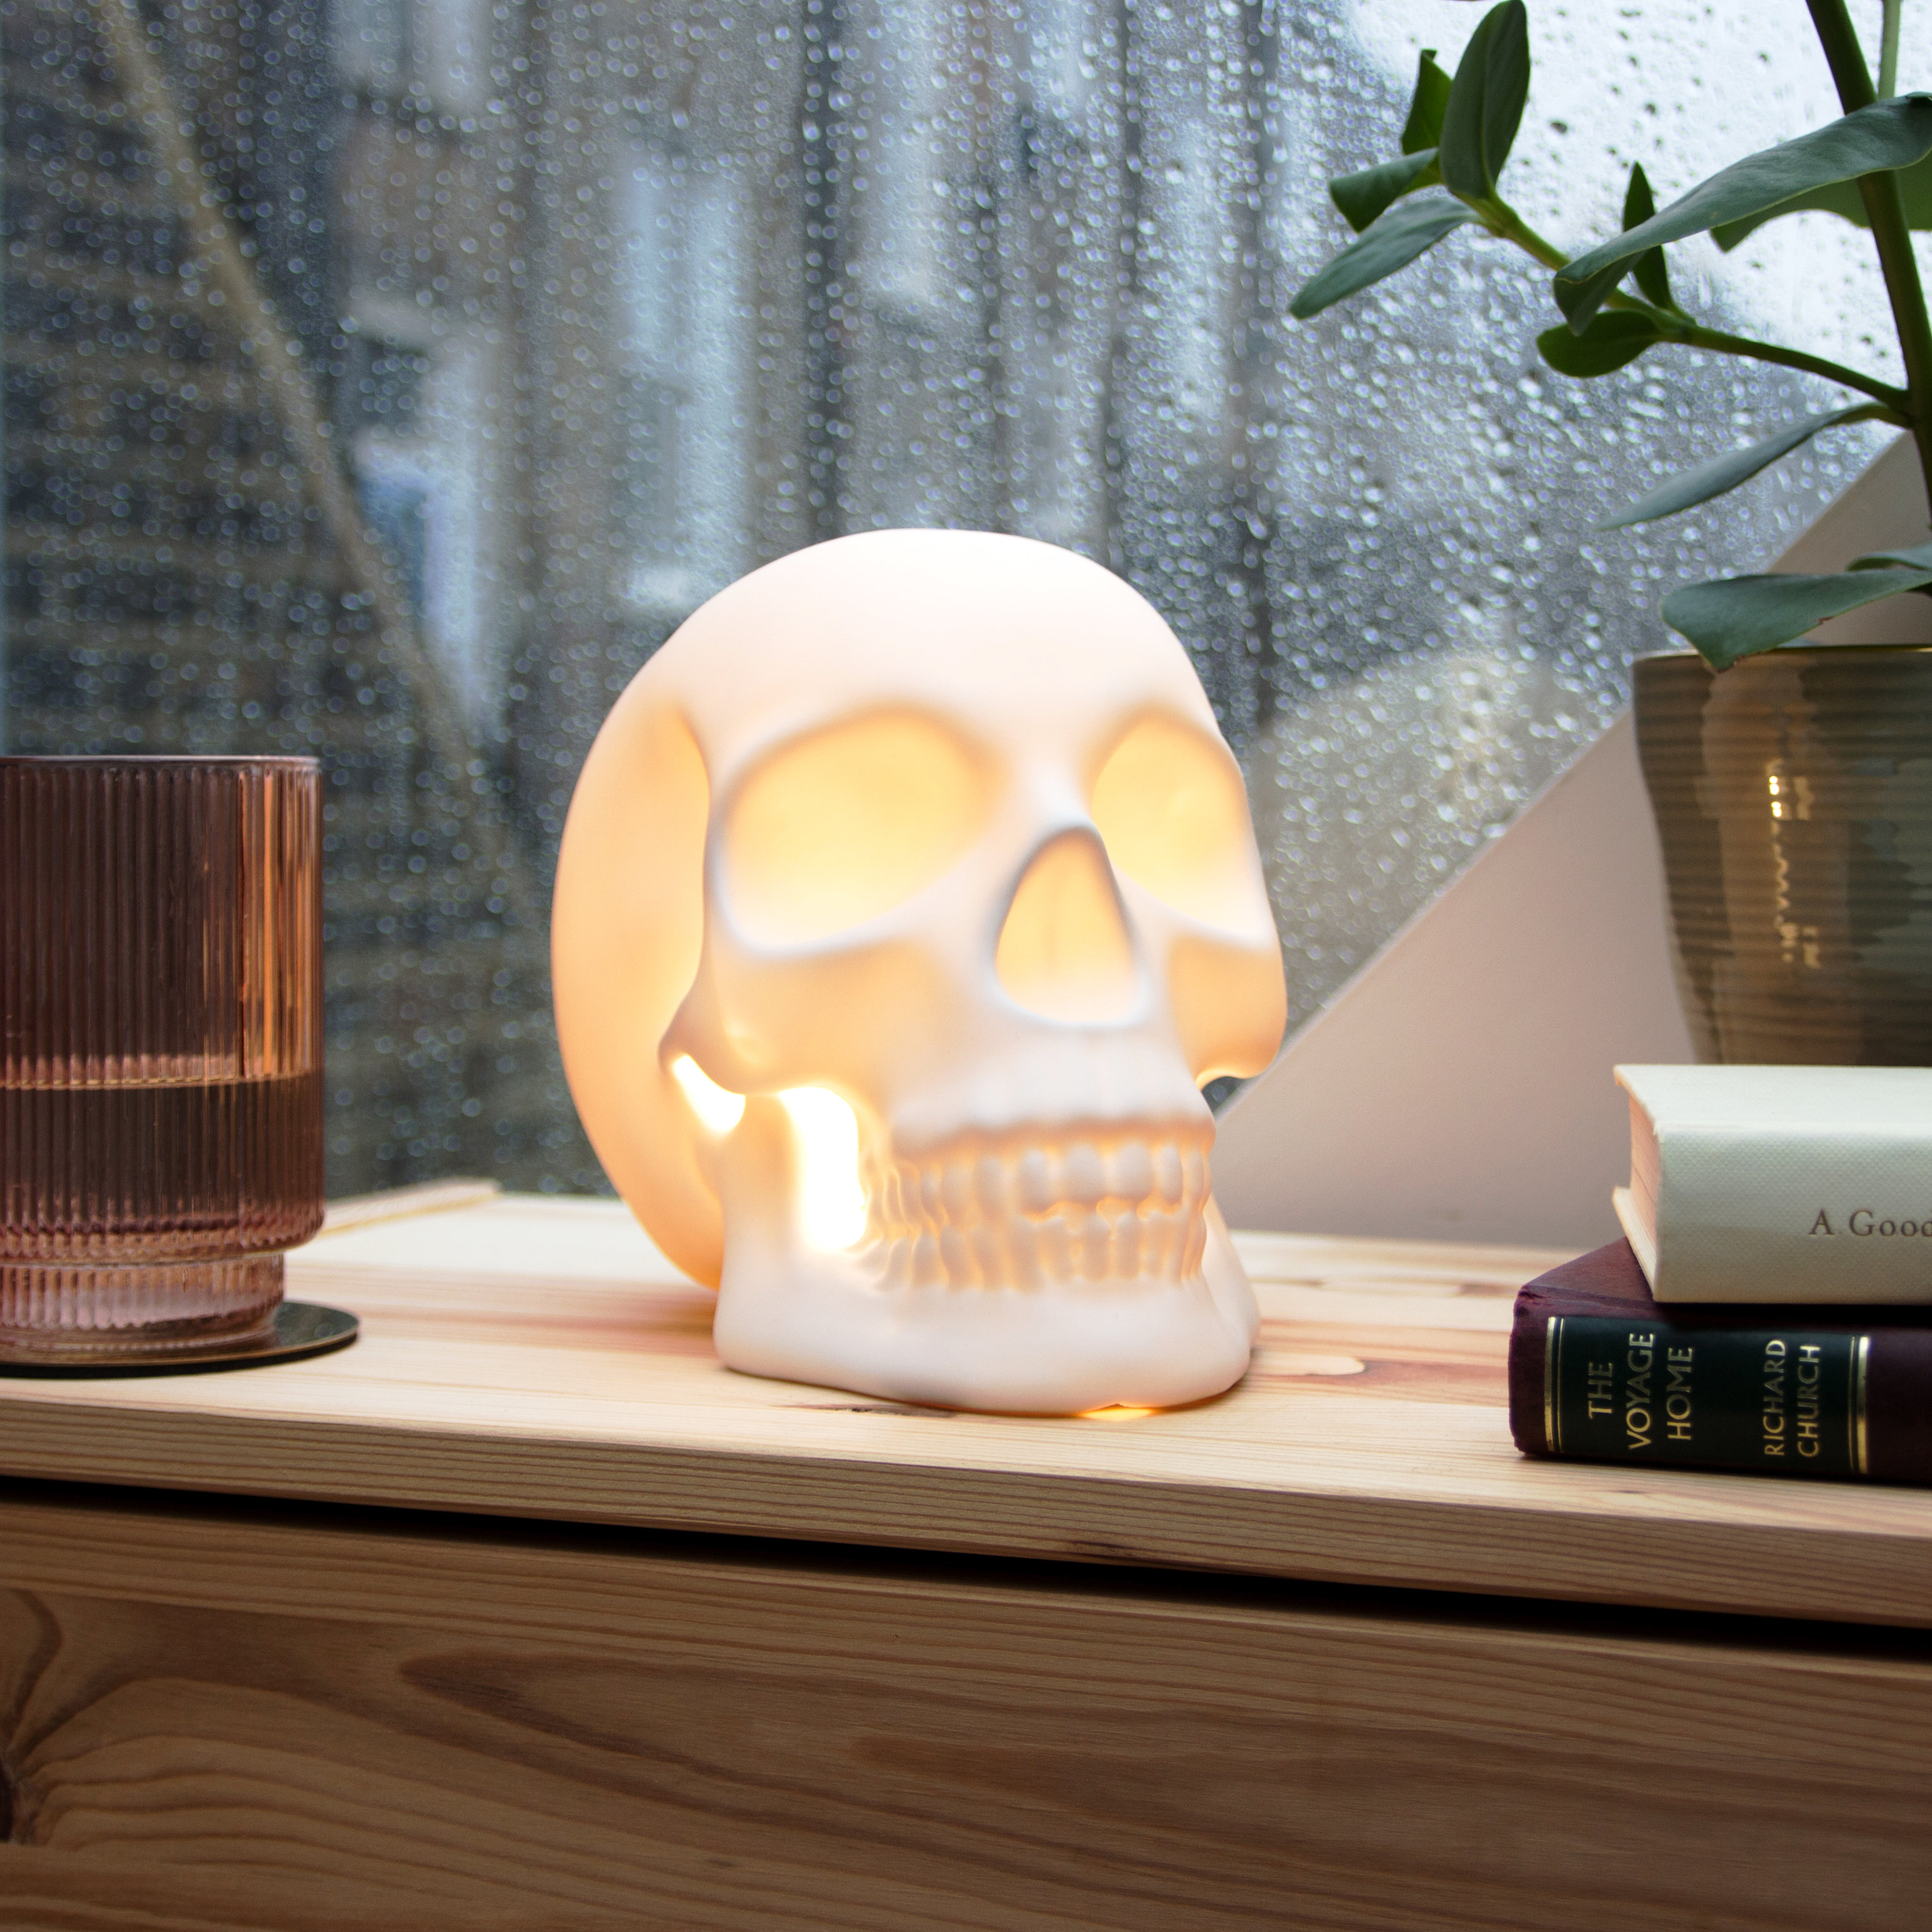 Skull lamp from front on bedside table